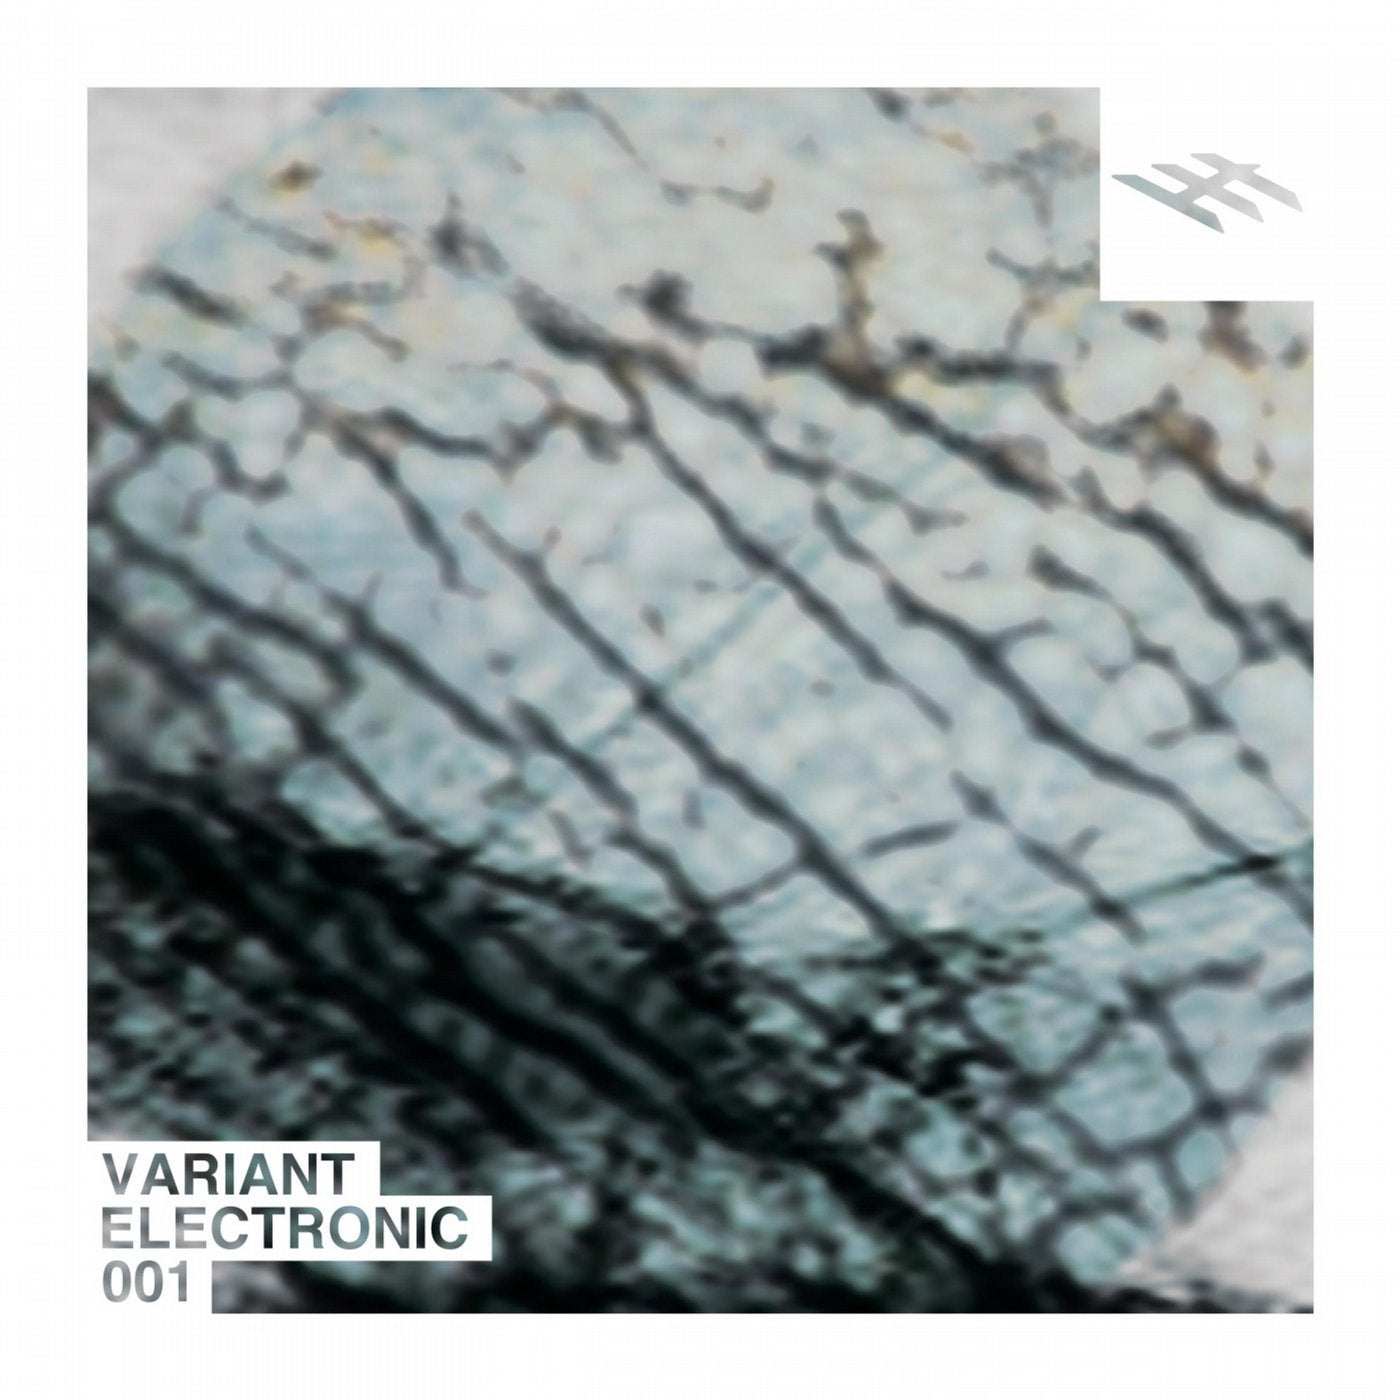 Variant Electronic 001